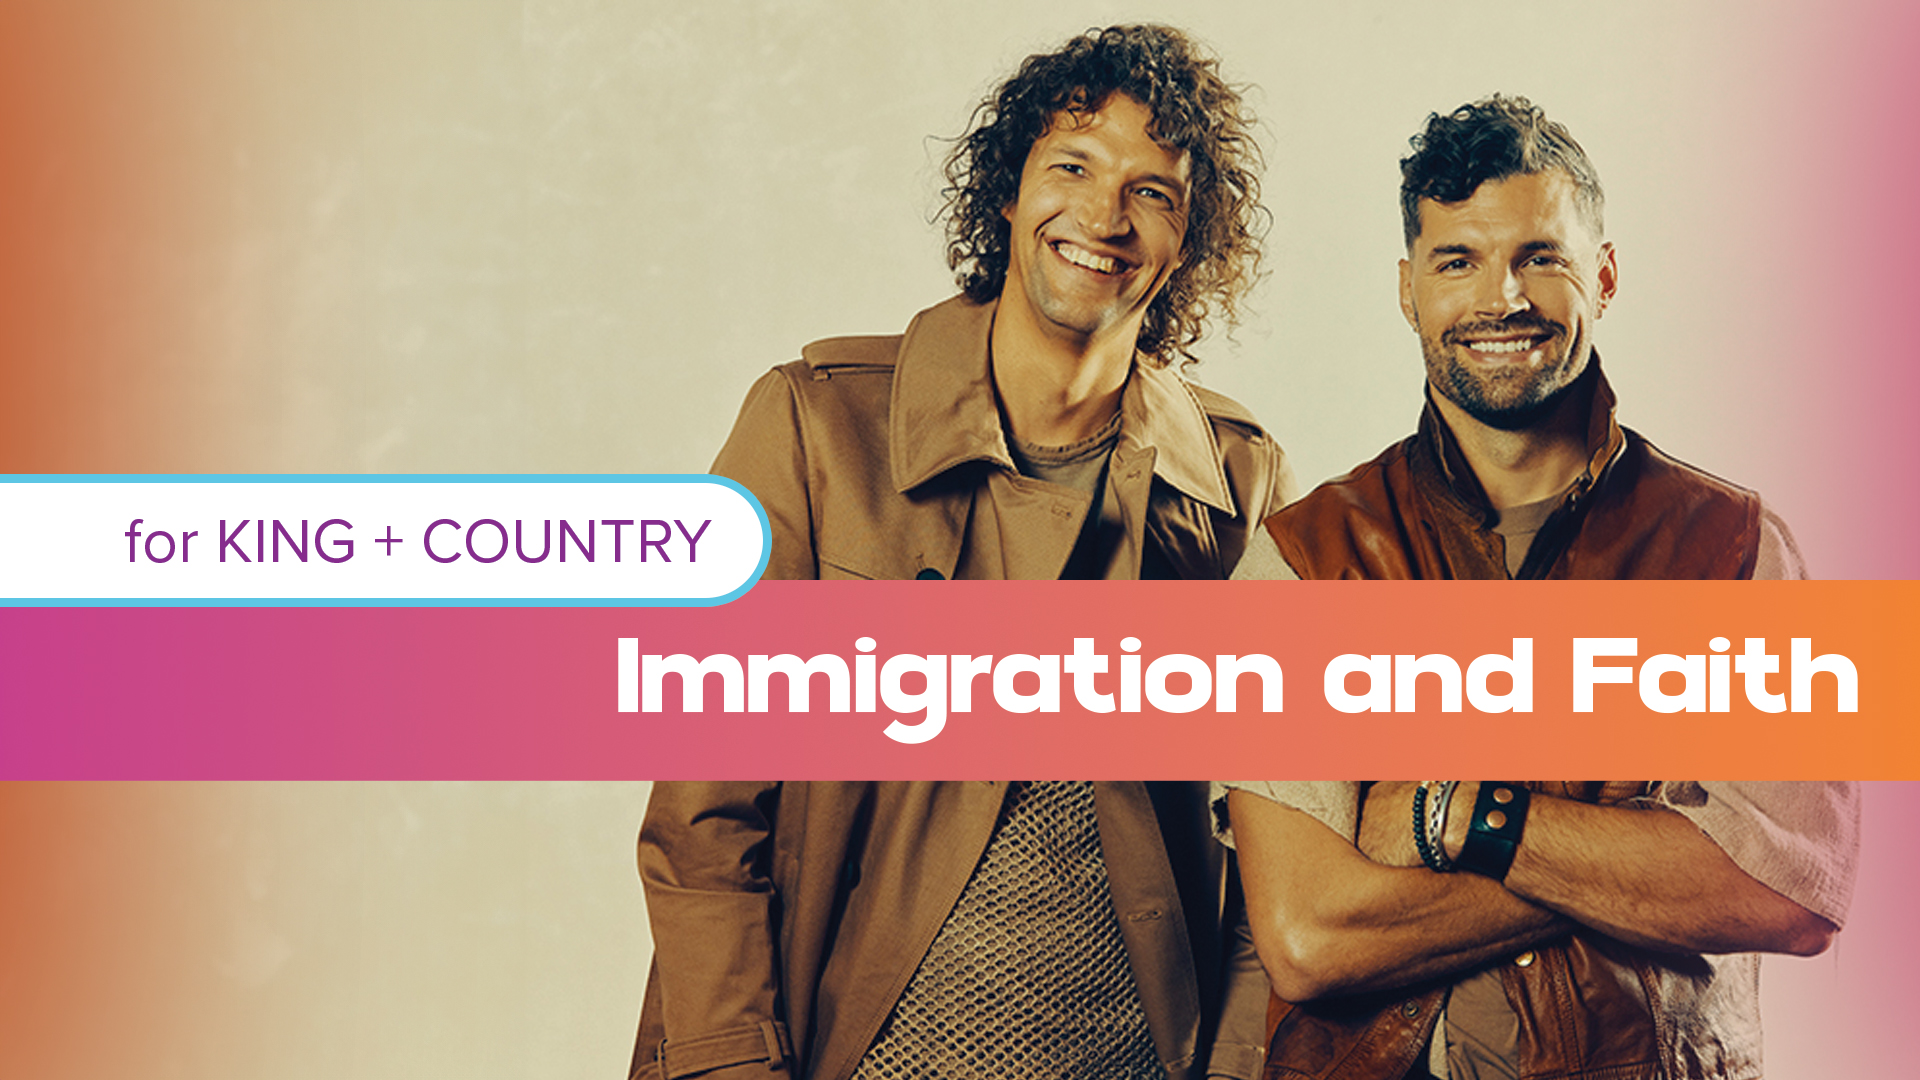 for KING + COUNTRY brothers. Caption reads: for KING + COUNTRY Immigration and Faith